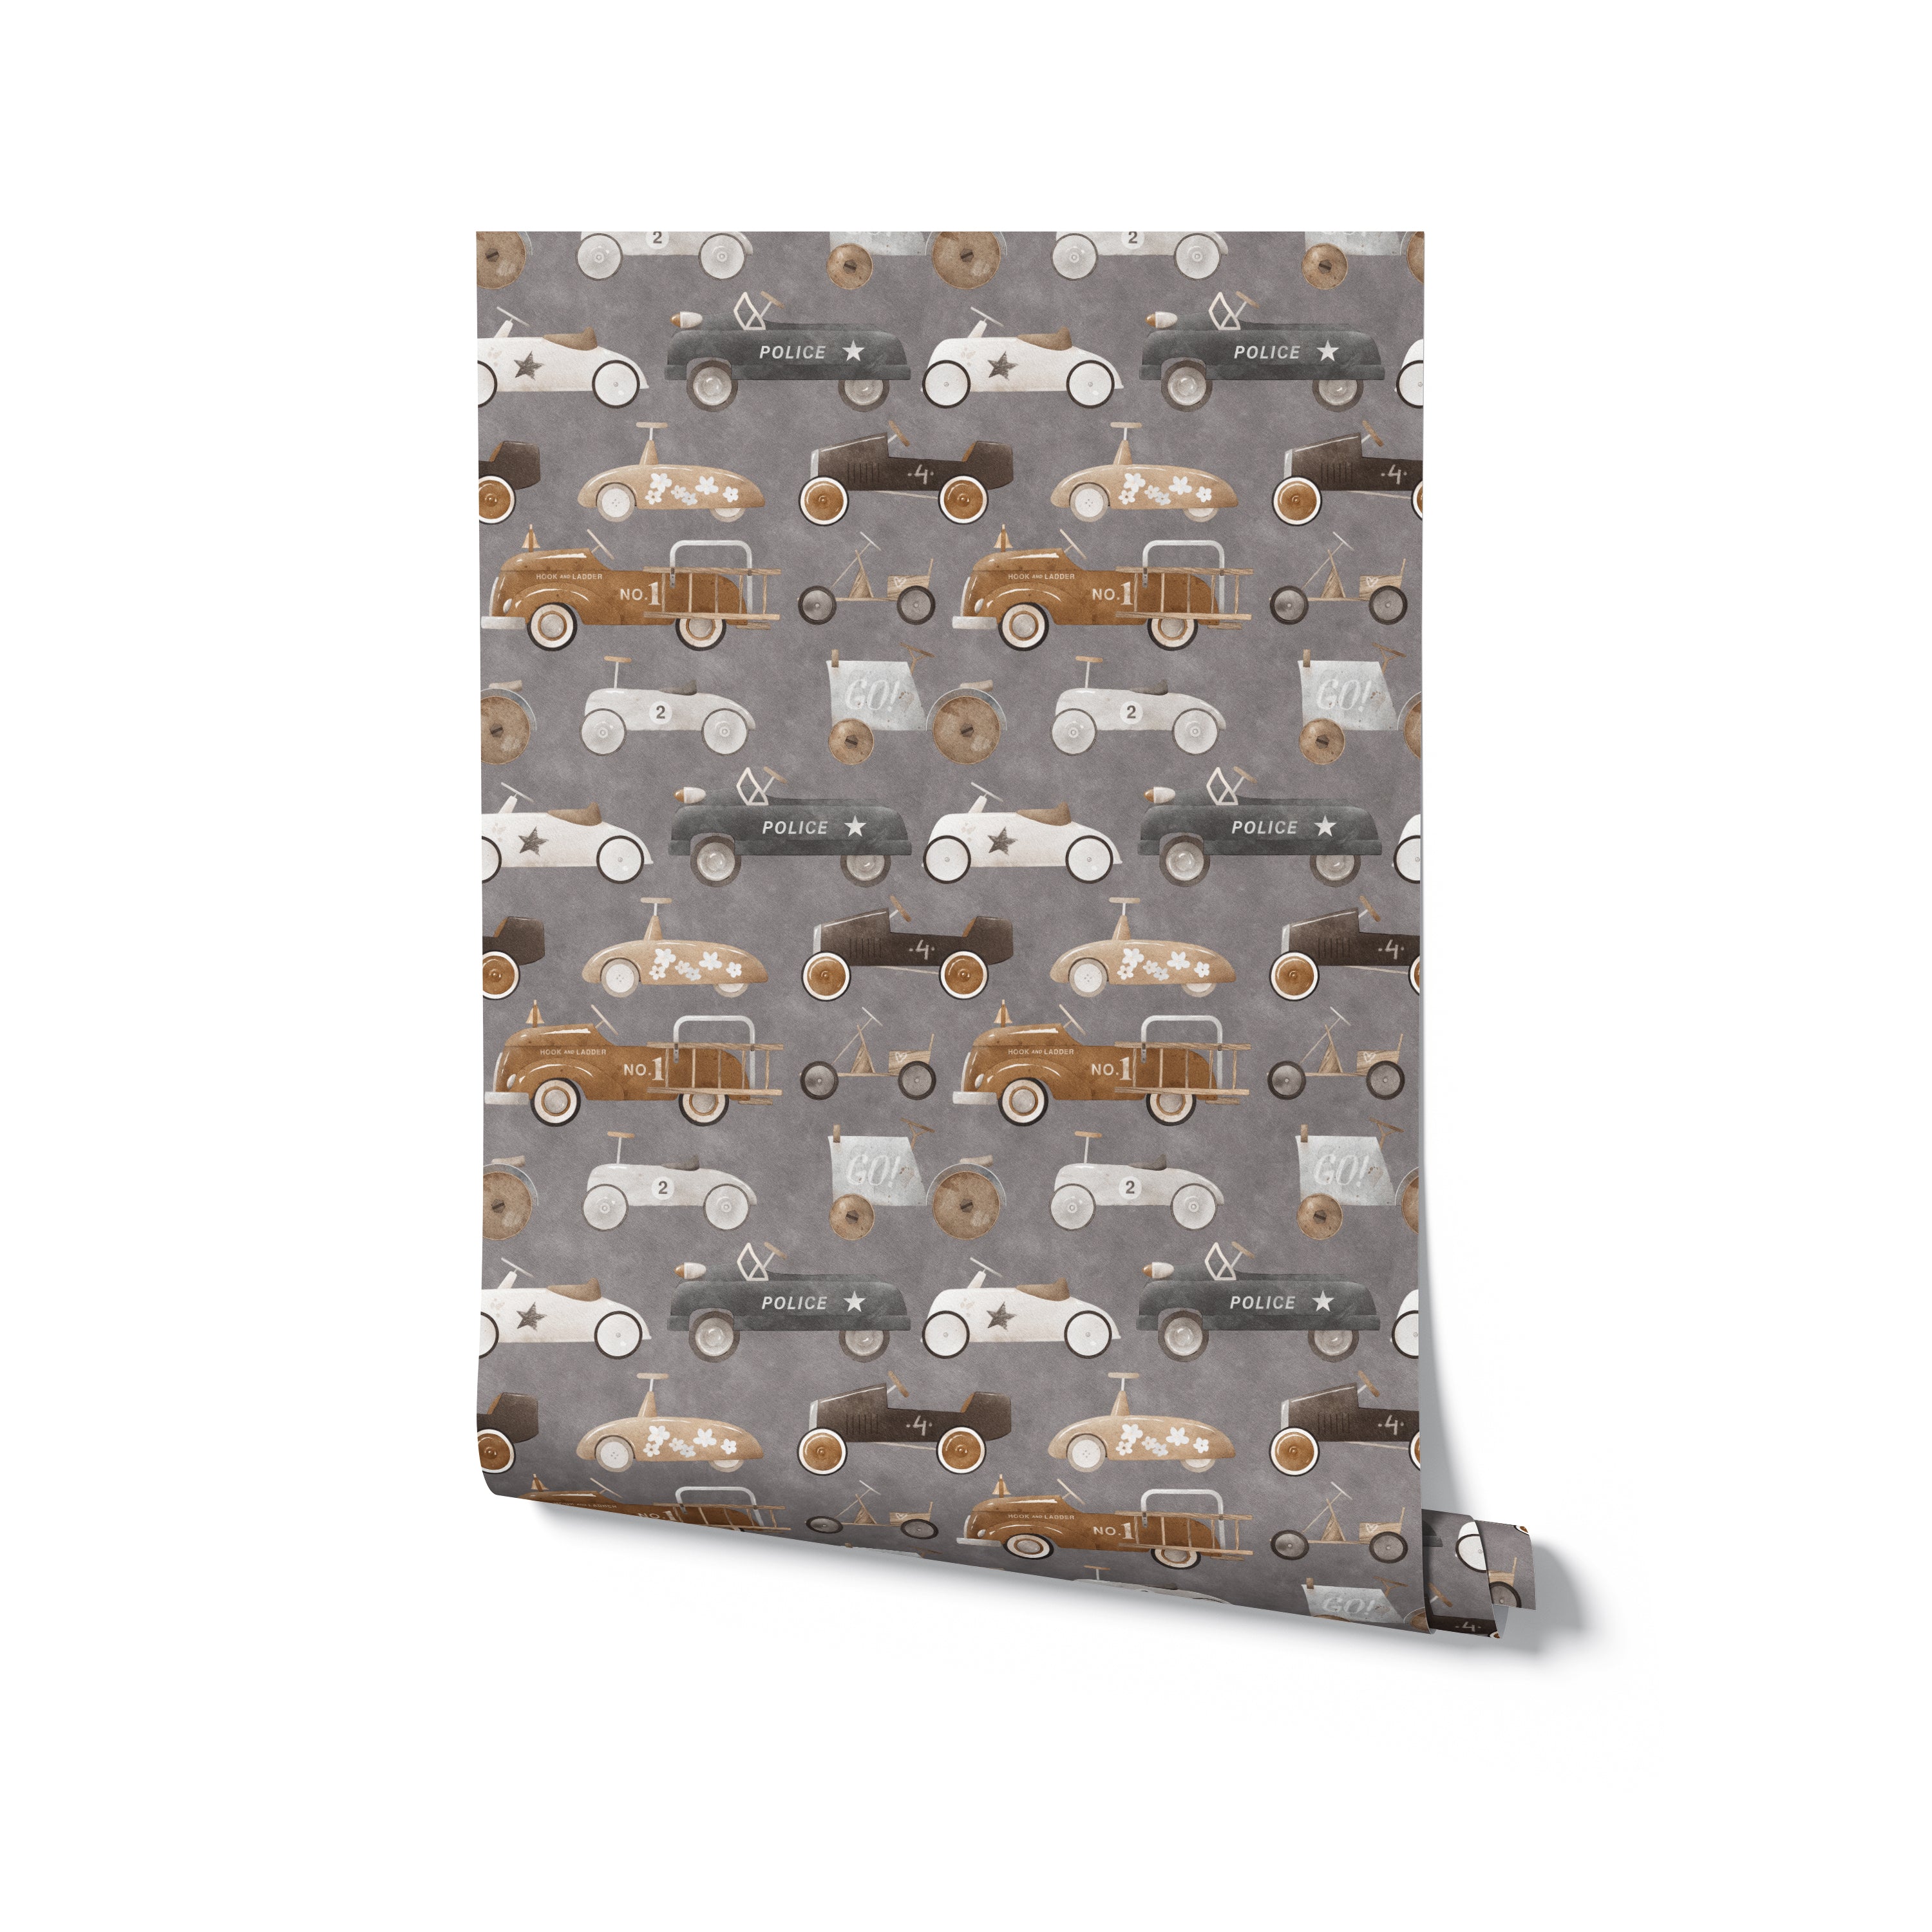 A flat lay view of a single roll of Retro Wheels Wallpaper. The wallpaper features a variety of vintage car illustrations in a seamless pattern, highlighting the detailed artwork and retro style in shades of brown, gray, and white.